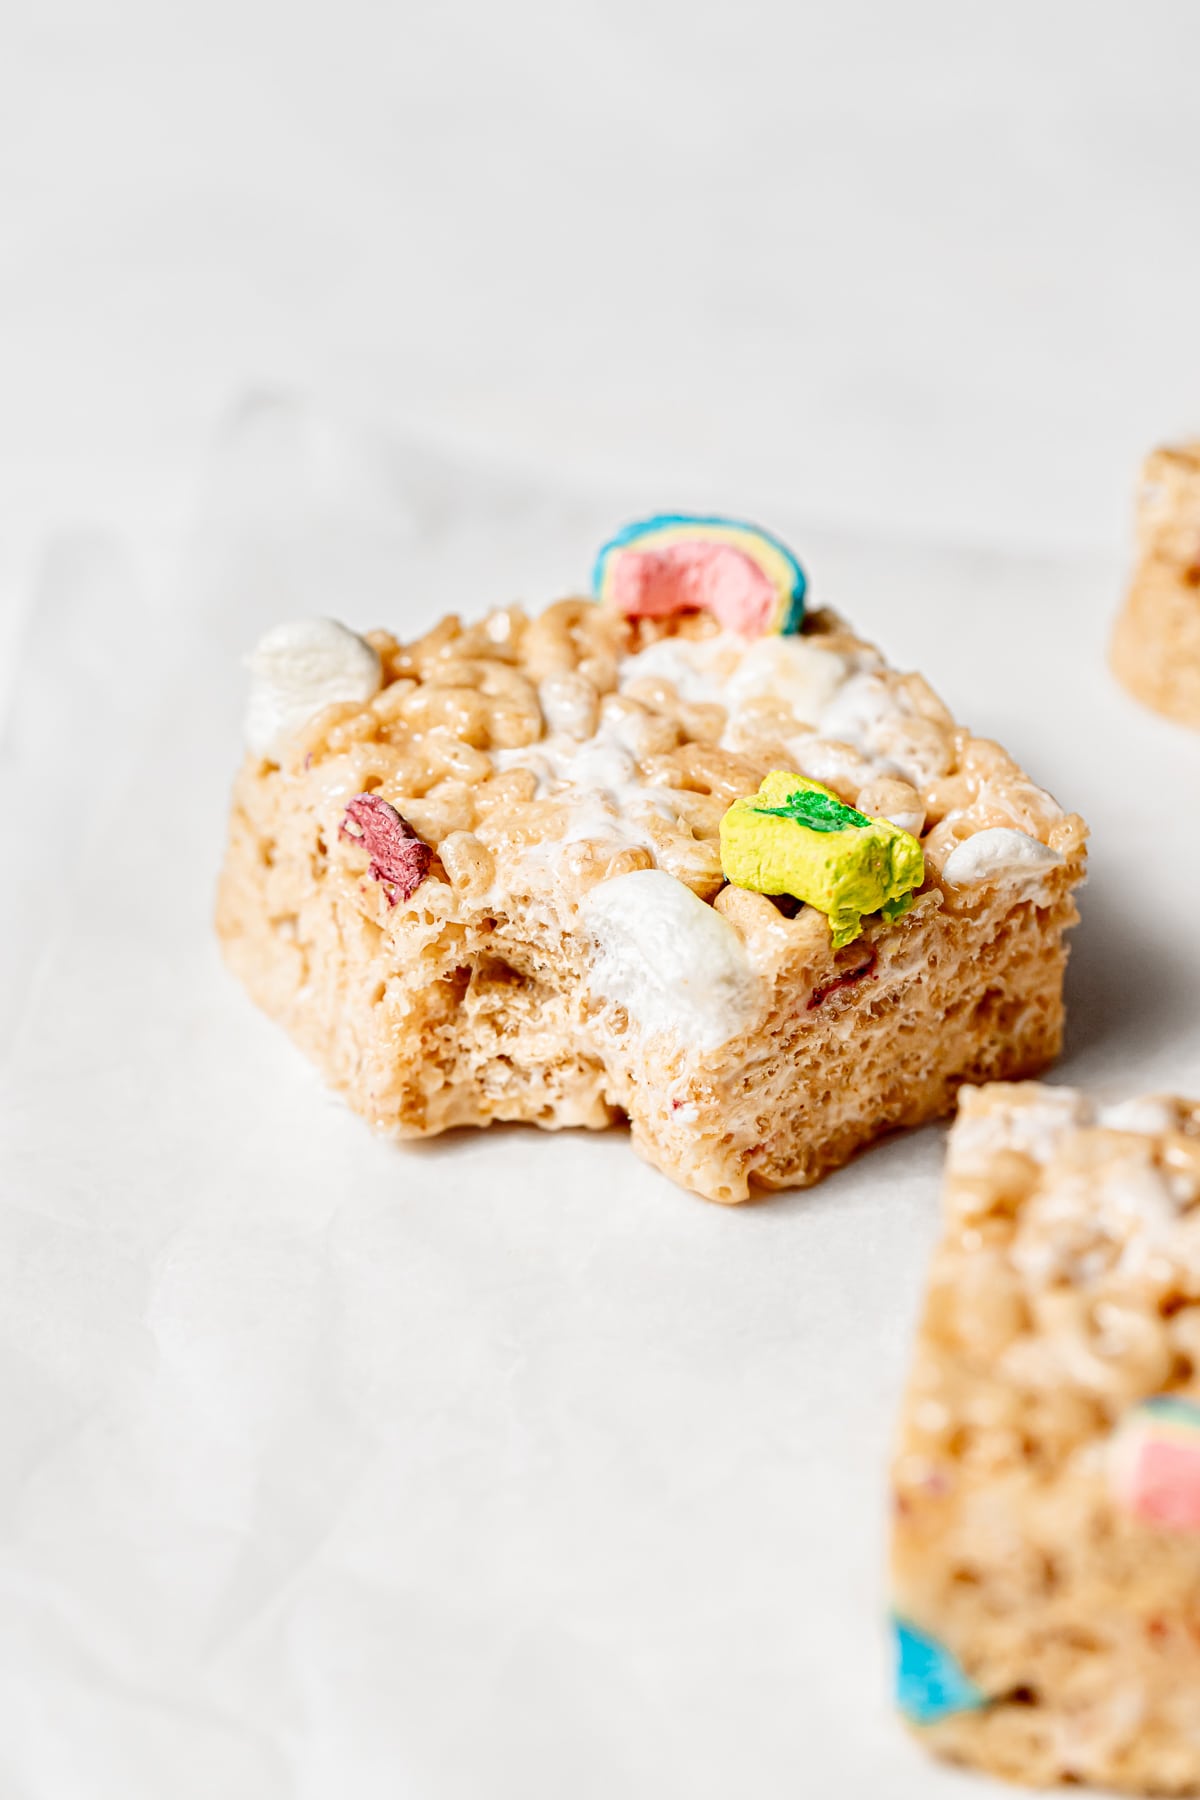 Lucky Charms Rice Krispie Treats square with small bite taken out.